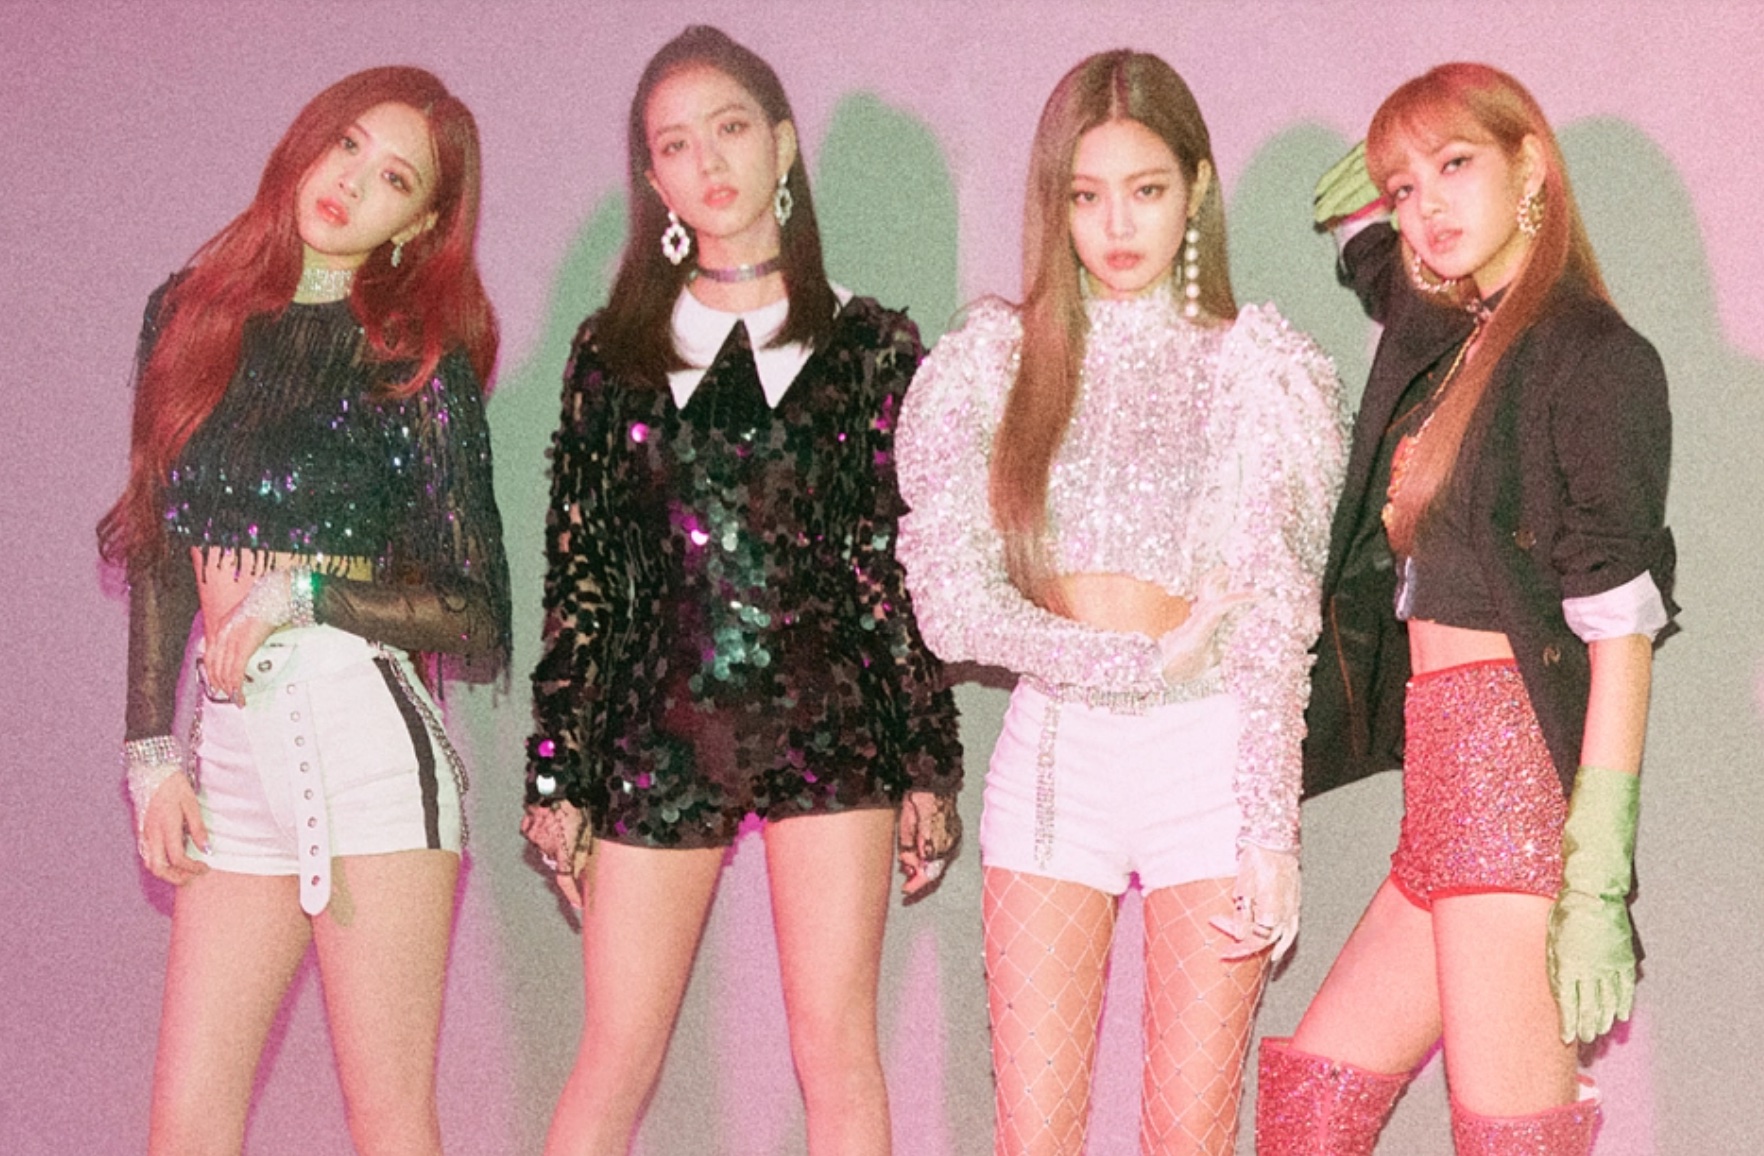 On July 11, BLACKPINK announced that they would host a virtual concert 